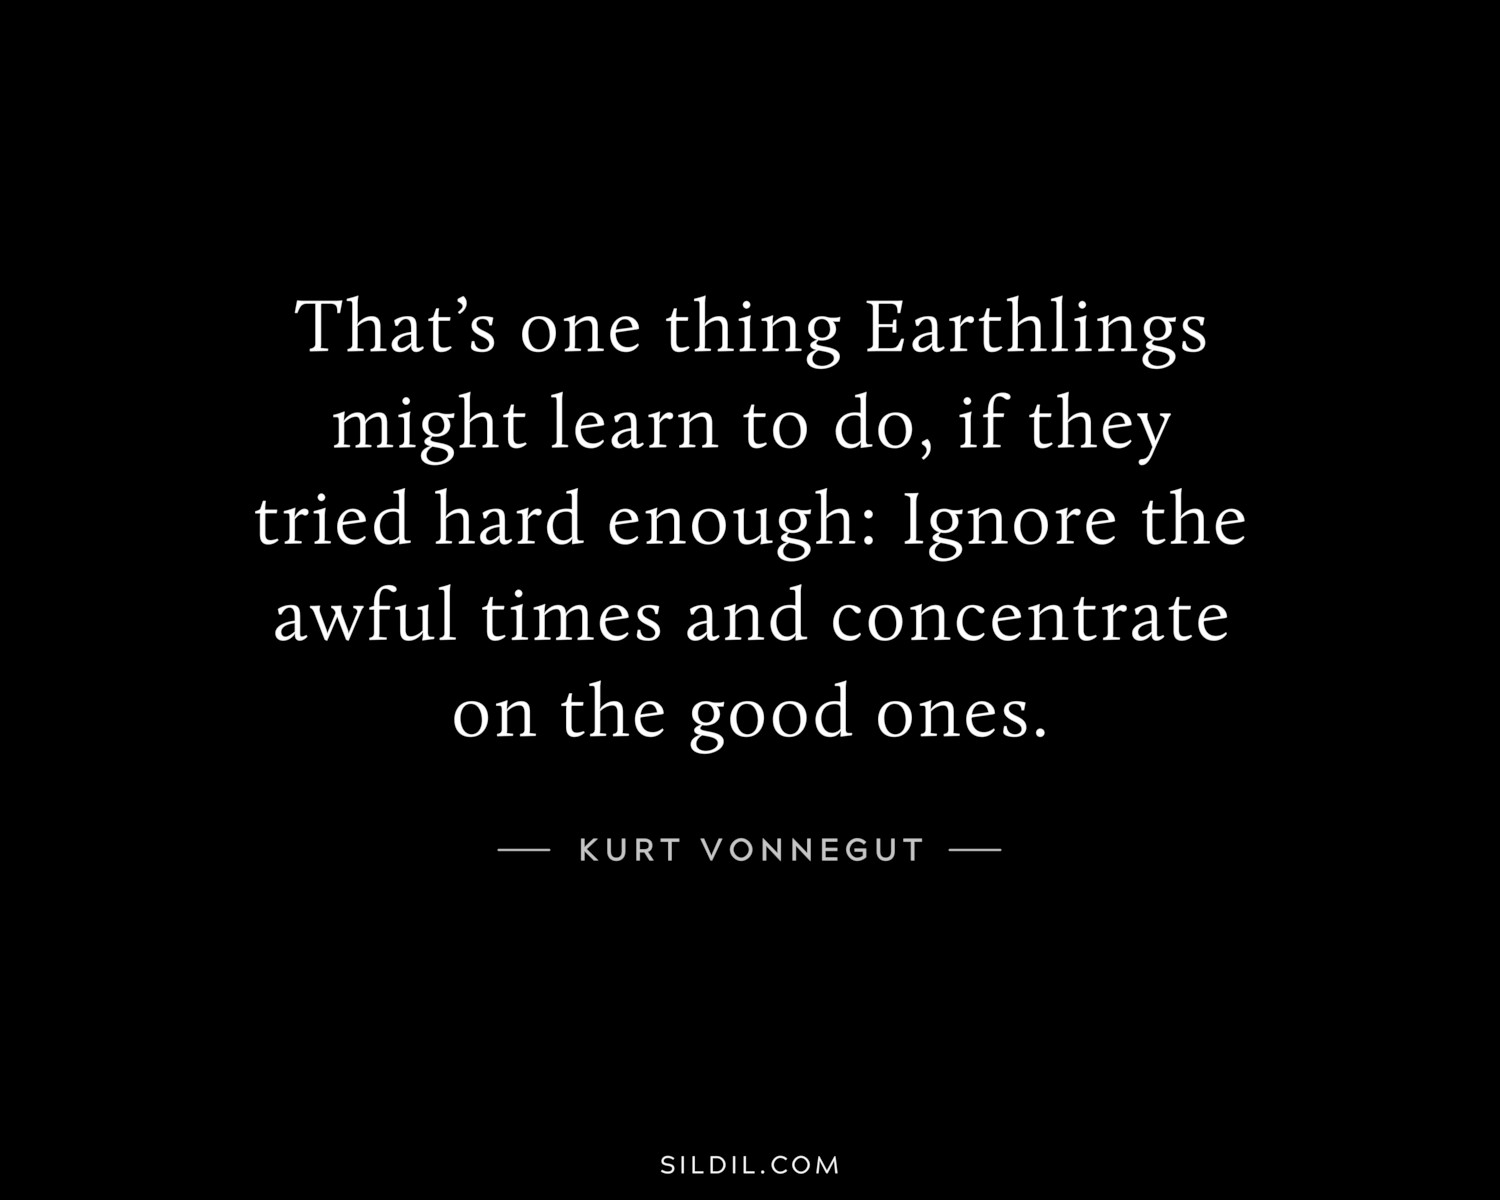 That’s one thing Earthlings might learn to do, if they tried hard enough: Ignore the awful times and concentrate on the good ones.